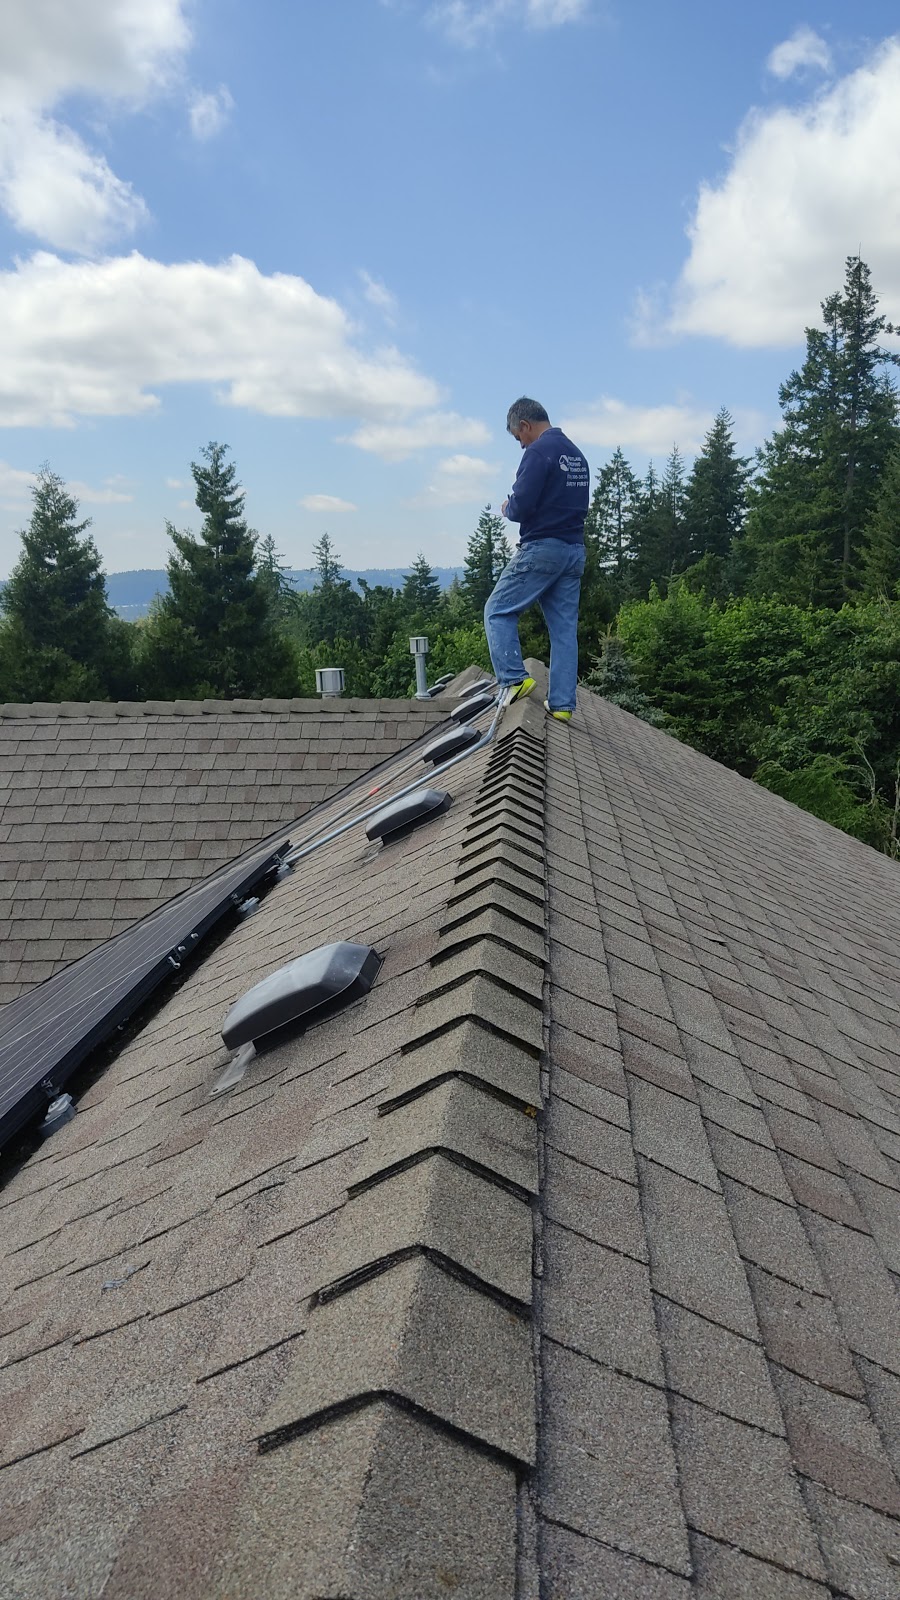 Nail It Roofing Portland | 16239 SE McLoughlin Blvd Suite 202, Milwaukie, OR 97267, USA | Phone: (503) 557-8989